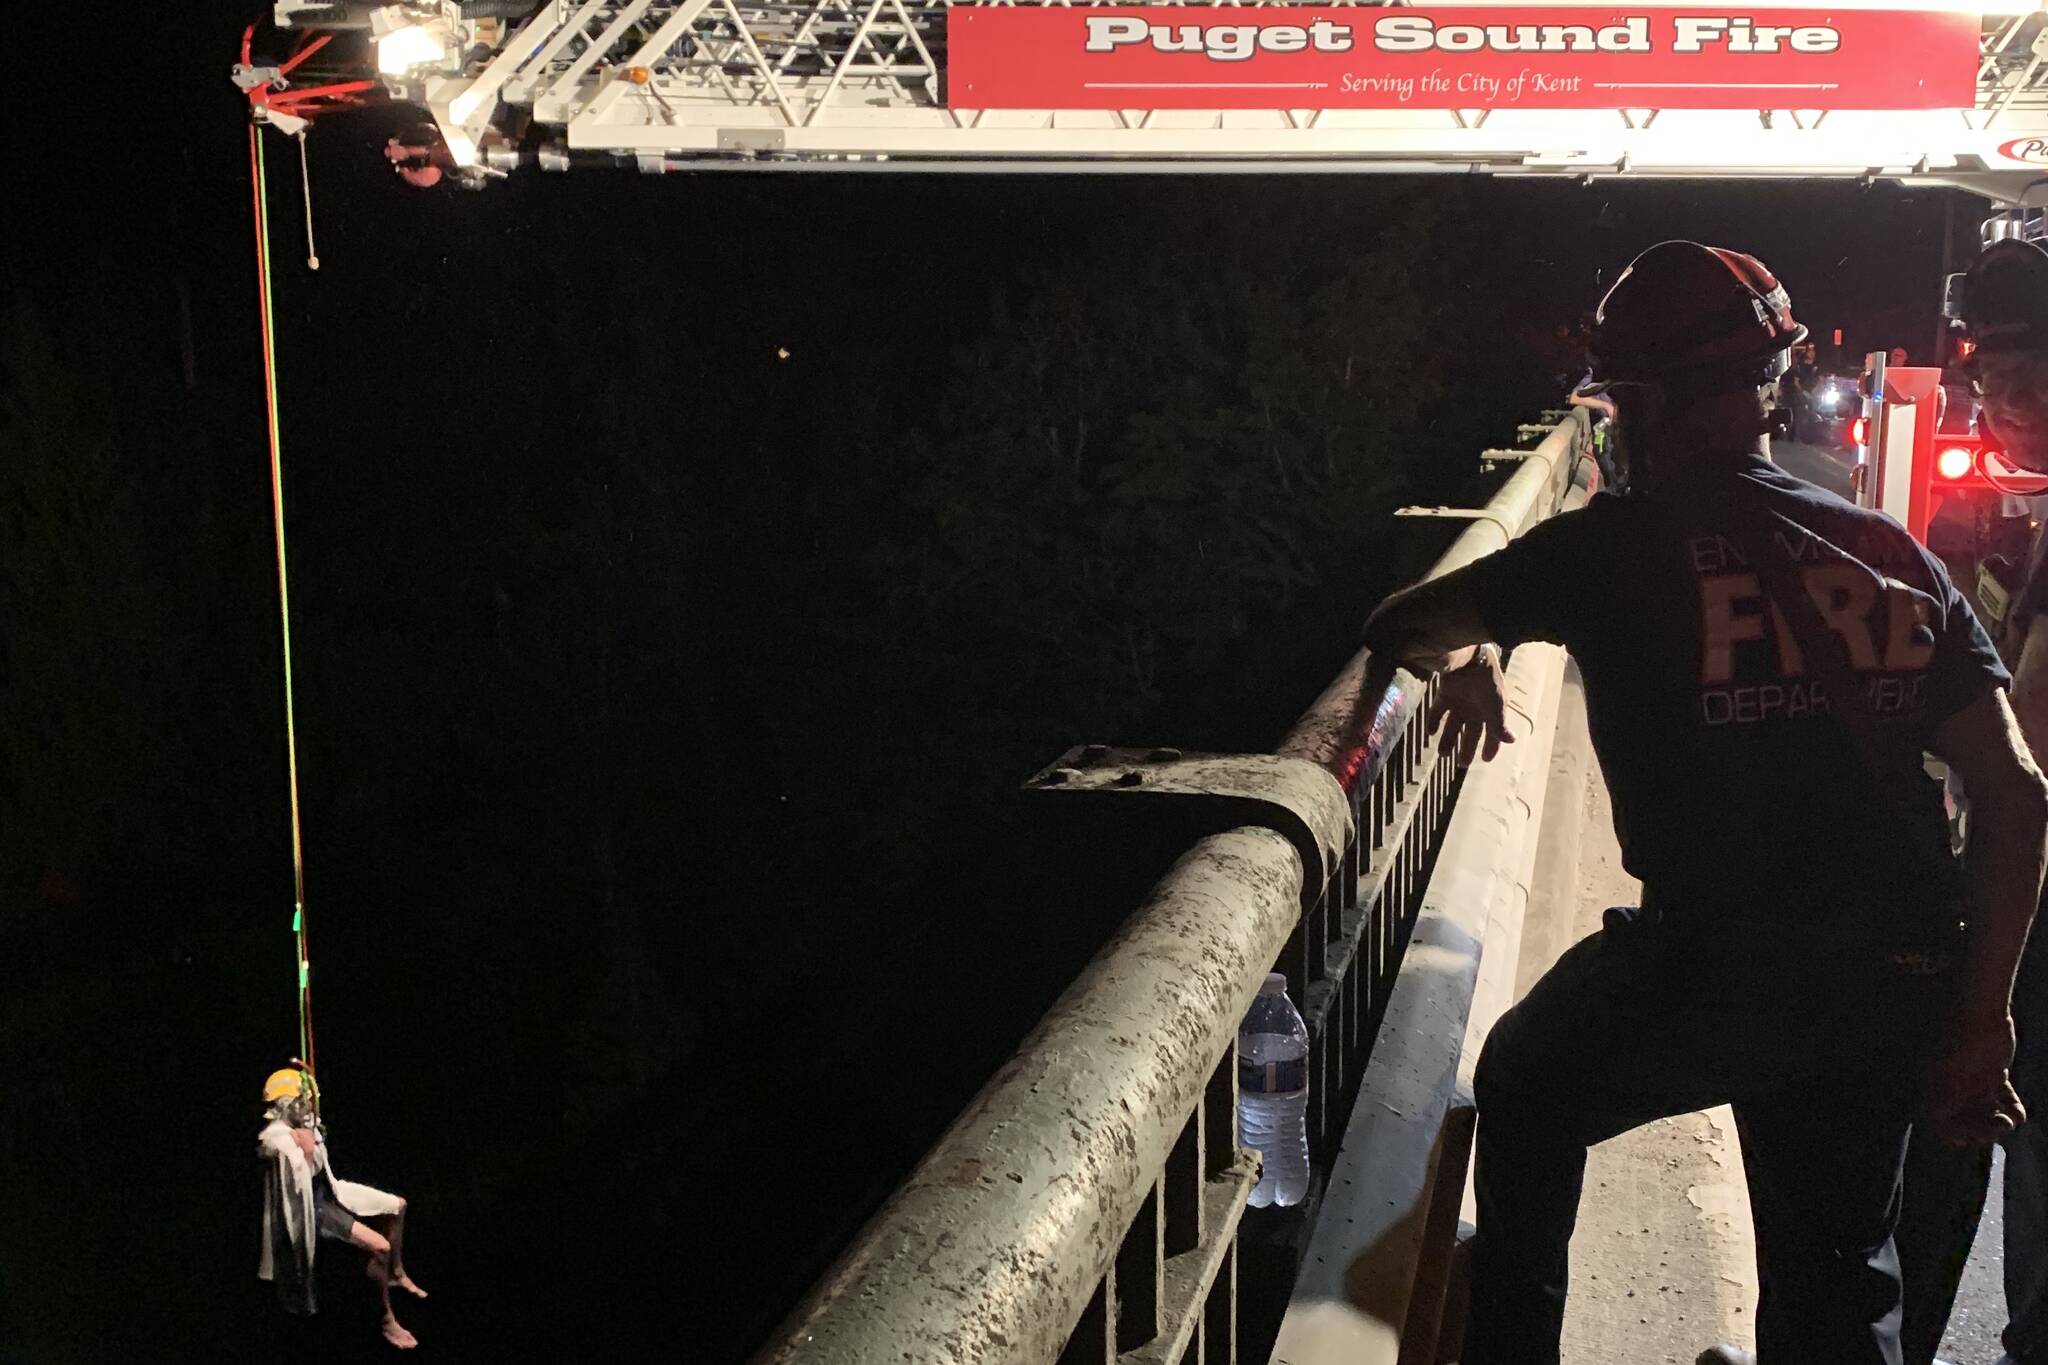 This photo, posted by a Public Information Officer, shows a Puget Sound Fire truck being used to rescue one of the people who became stranded in the Green River Sunday.